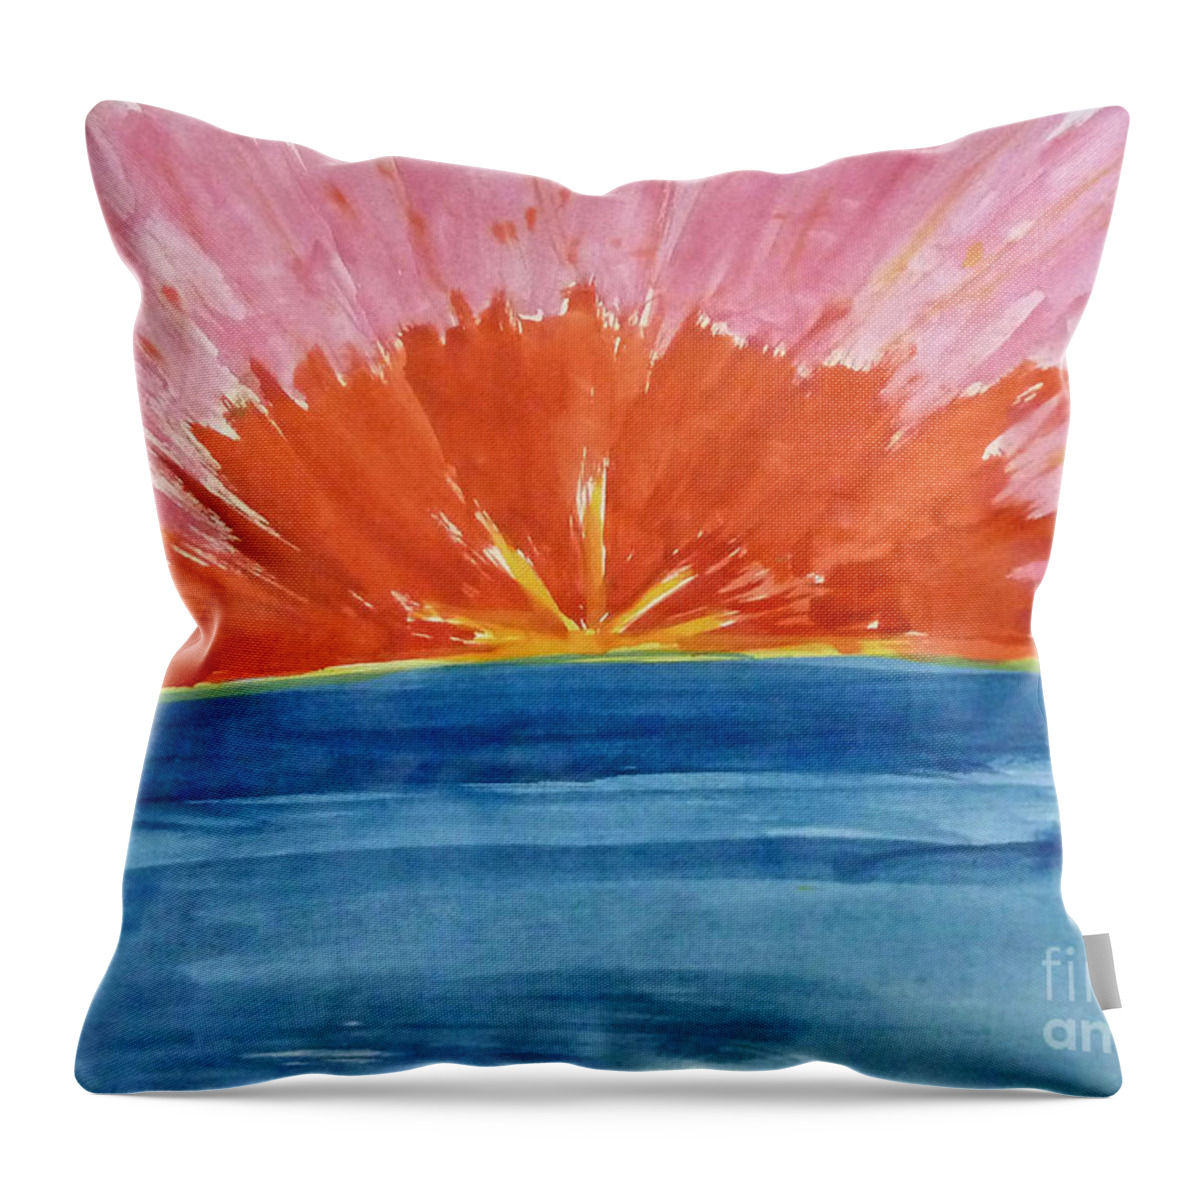 Vibrant Throw Pillow featuring the painting Sunset by Francesca Mackenney